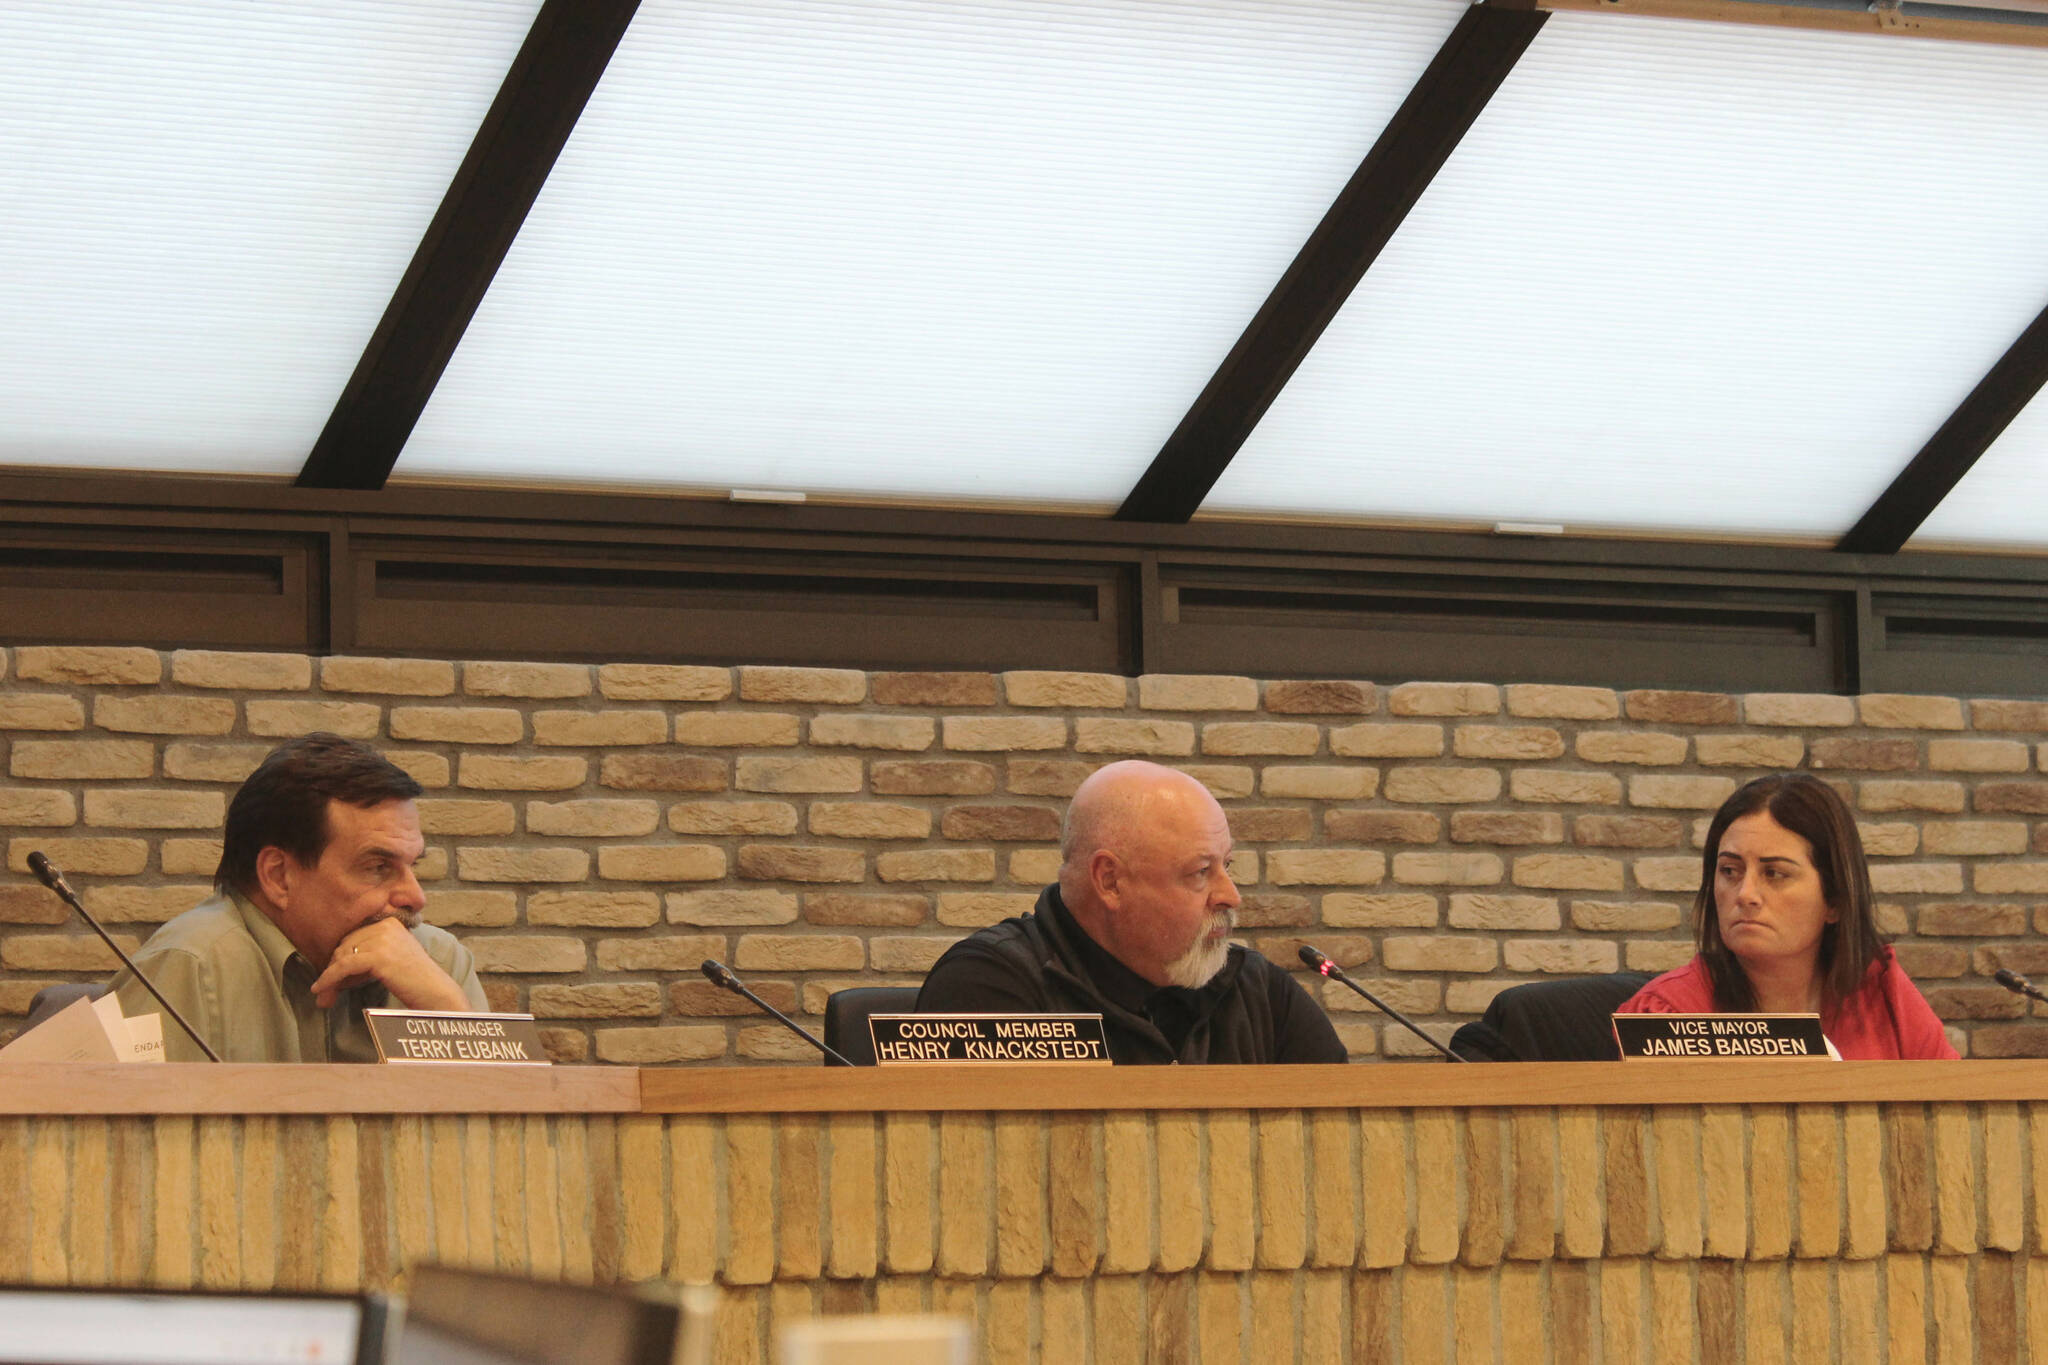 Kenai City Council member Henry Knackstedt (left), Kenai Vice Mayor James Baisden (center) and Kenai City Council member Teea Winger (right) debate a resolution that would have voiced the city’s support for a legislative increase in school district funding during a city council meeting on Wednesday, April 5, 2023, in Kenai, Alaska. (Ashlyn O’Hara/Peninsula Clarion)